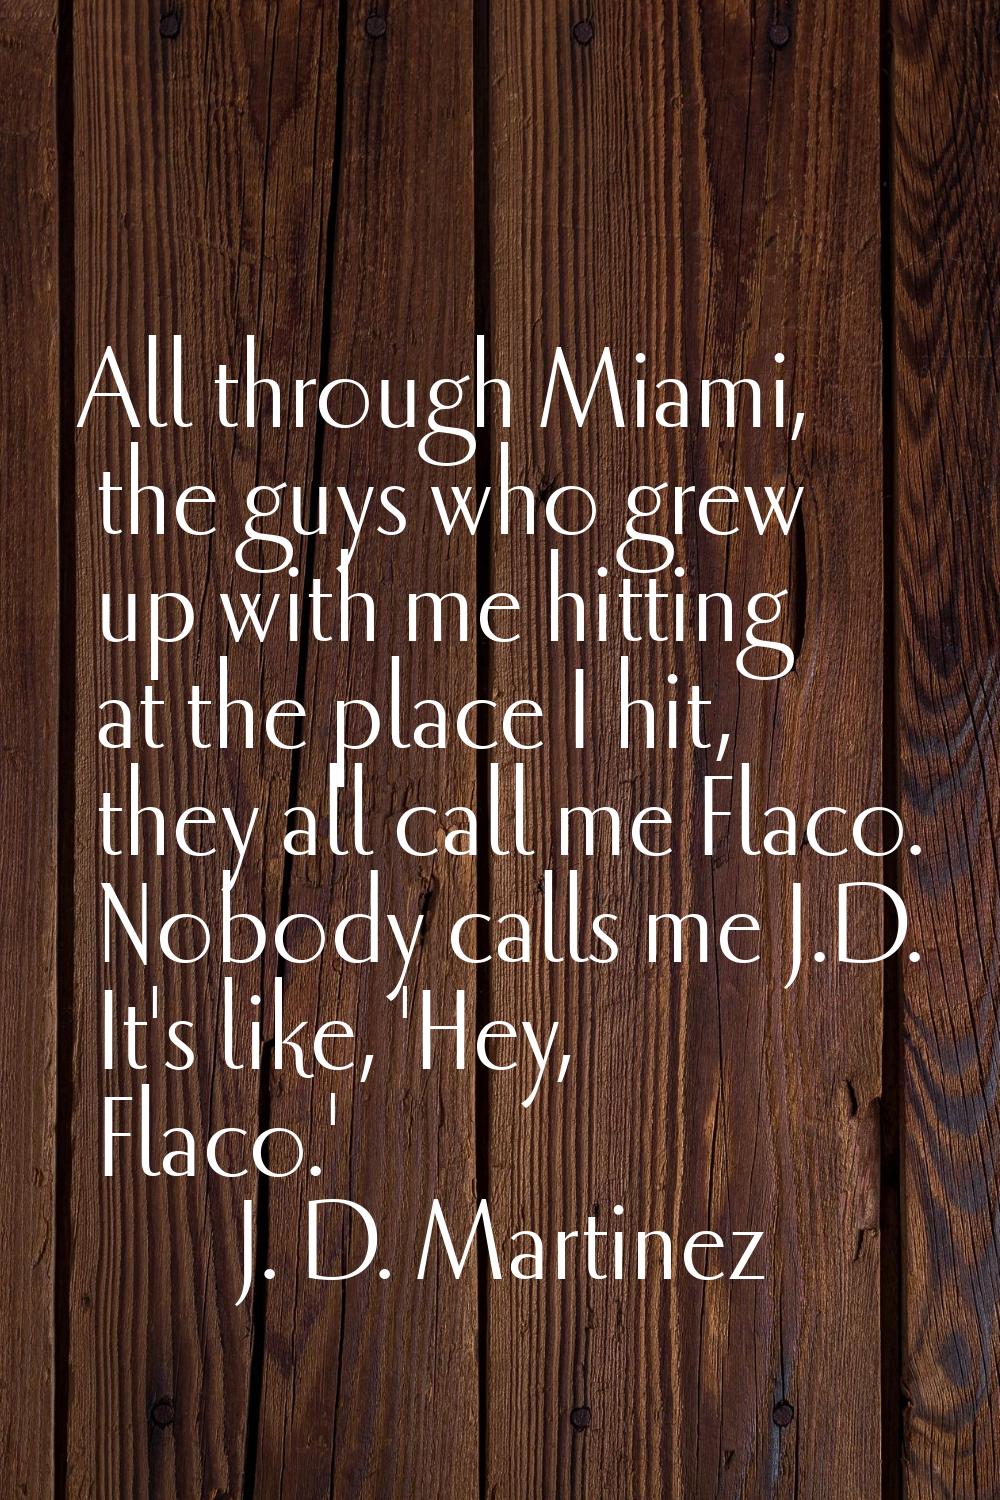 All through Miami, the guys who grew up with me hitting at the place I hit, they all call me Flaco.